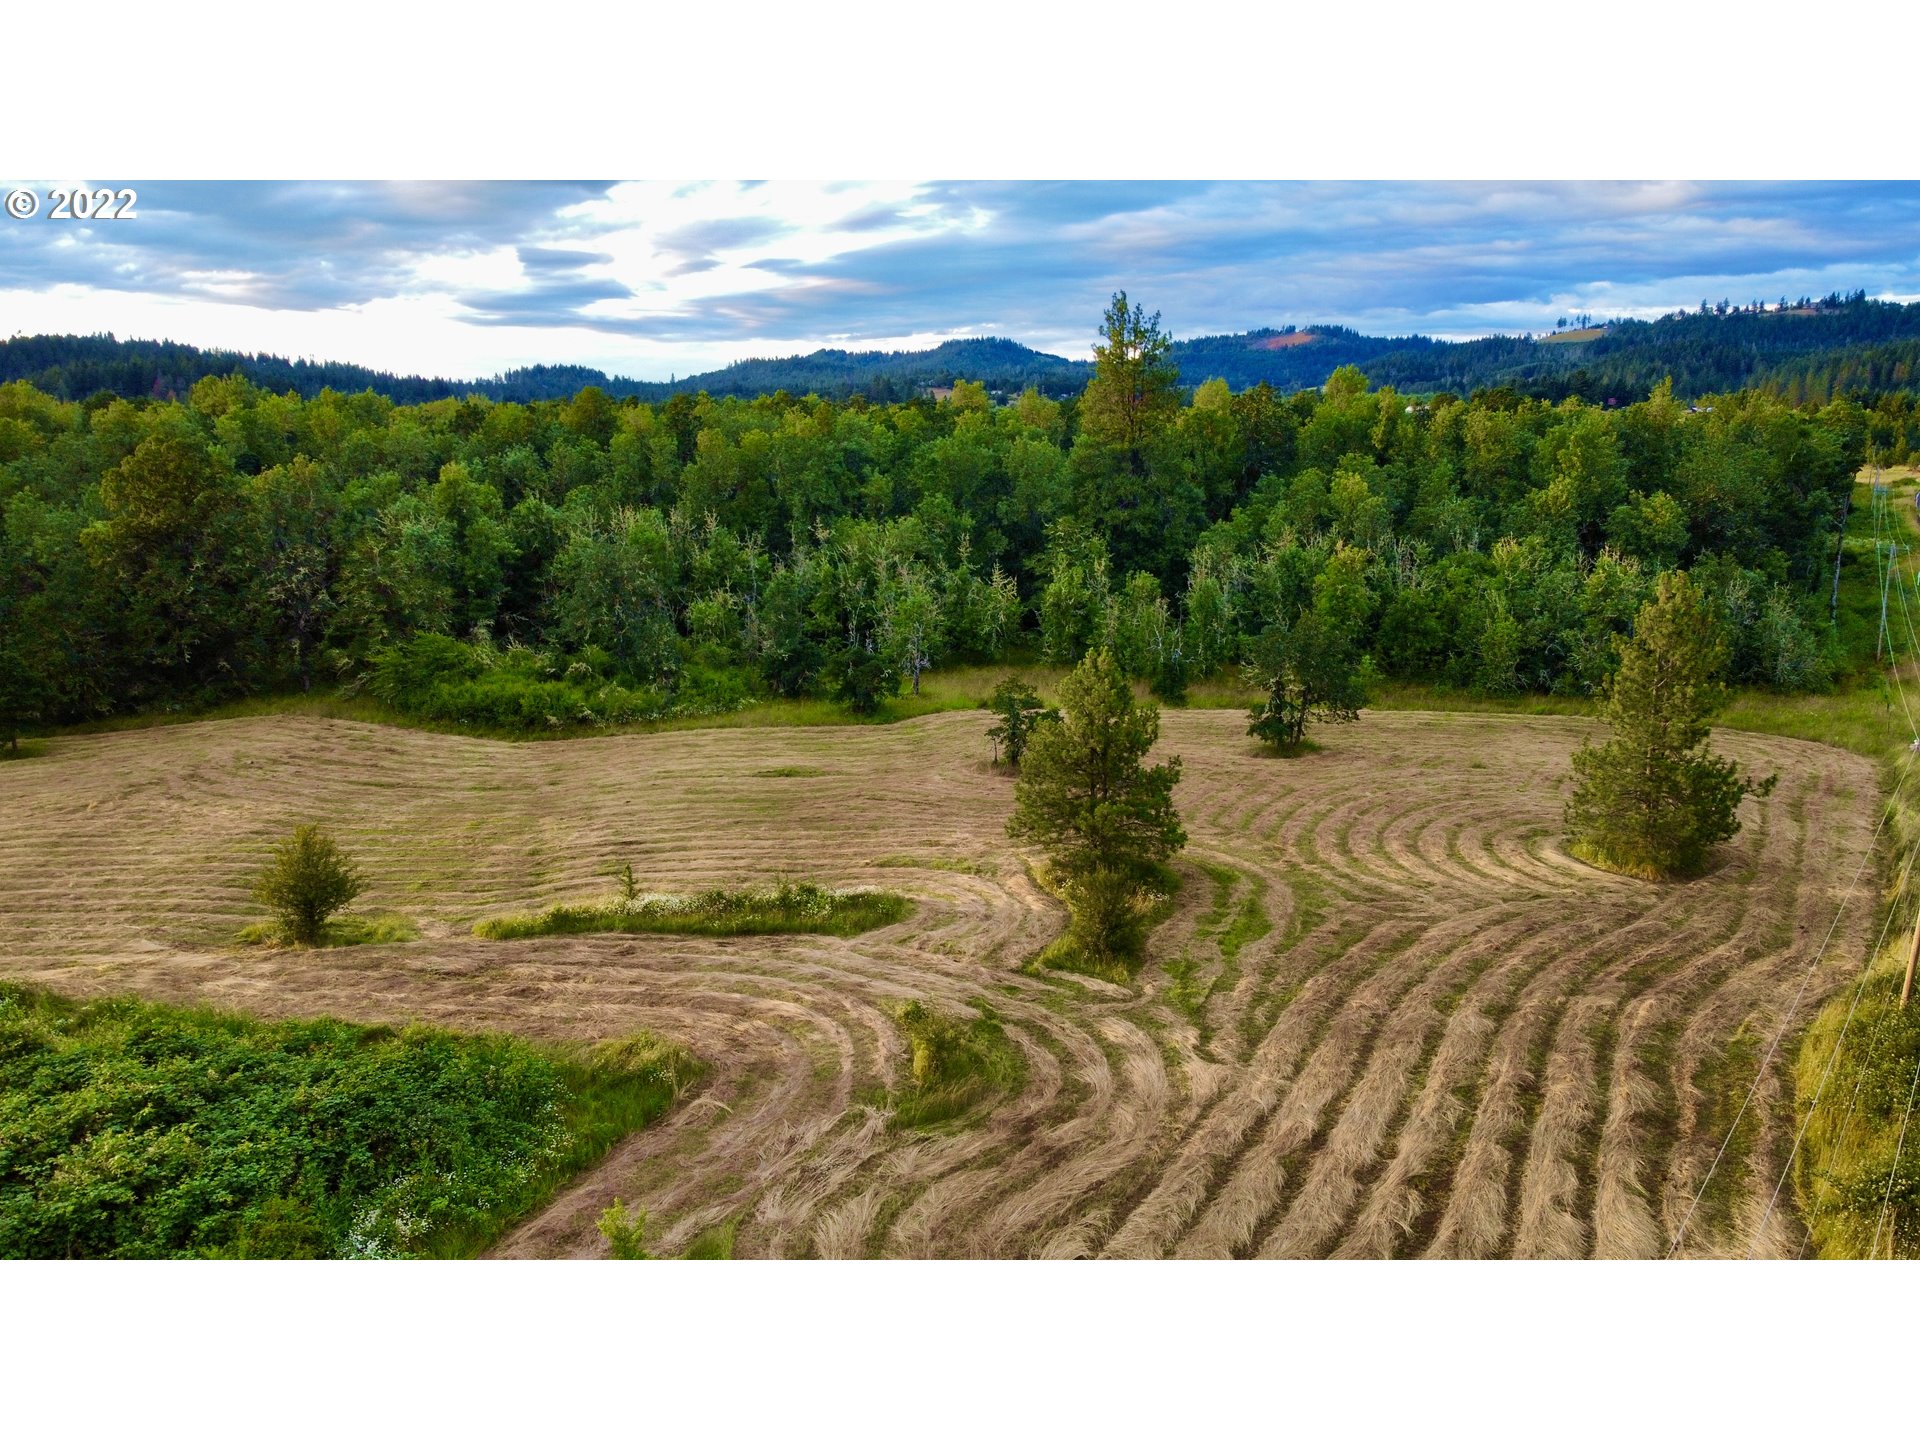 Over 11 acres of land, zoned E40 (Exclusive Farm Use Zone), located close in to town in the beautiful countryside of Spencer Creek Rd.